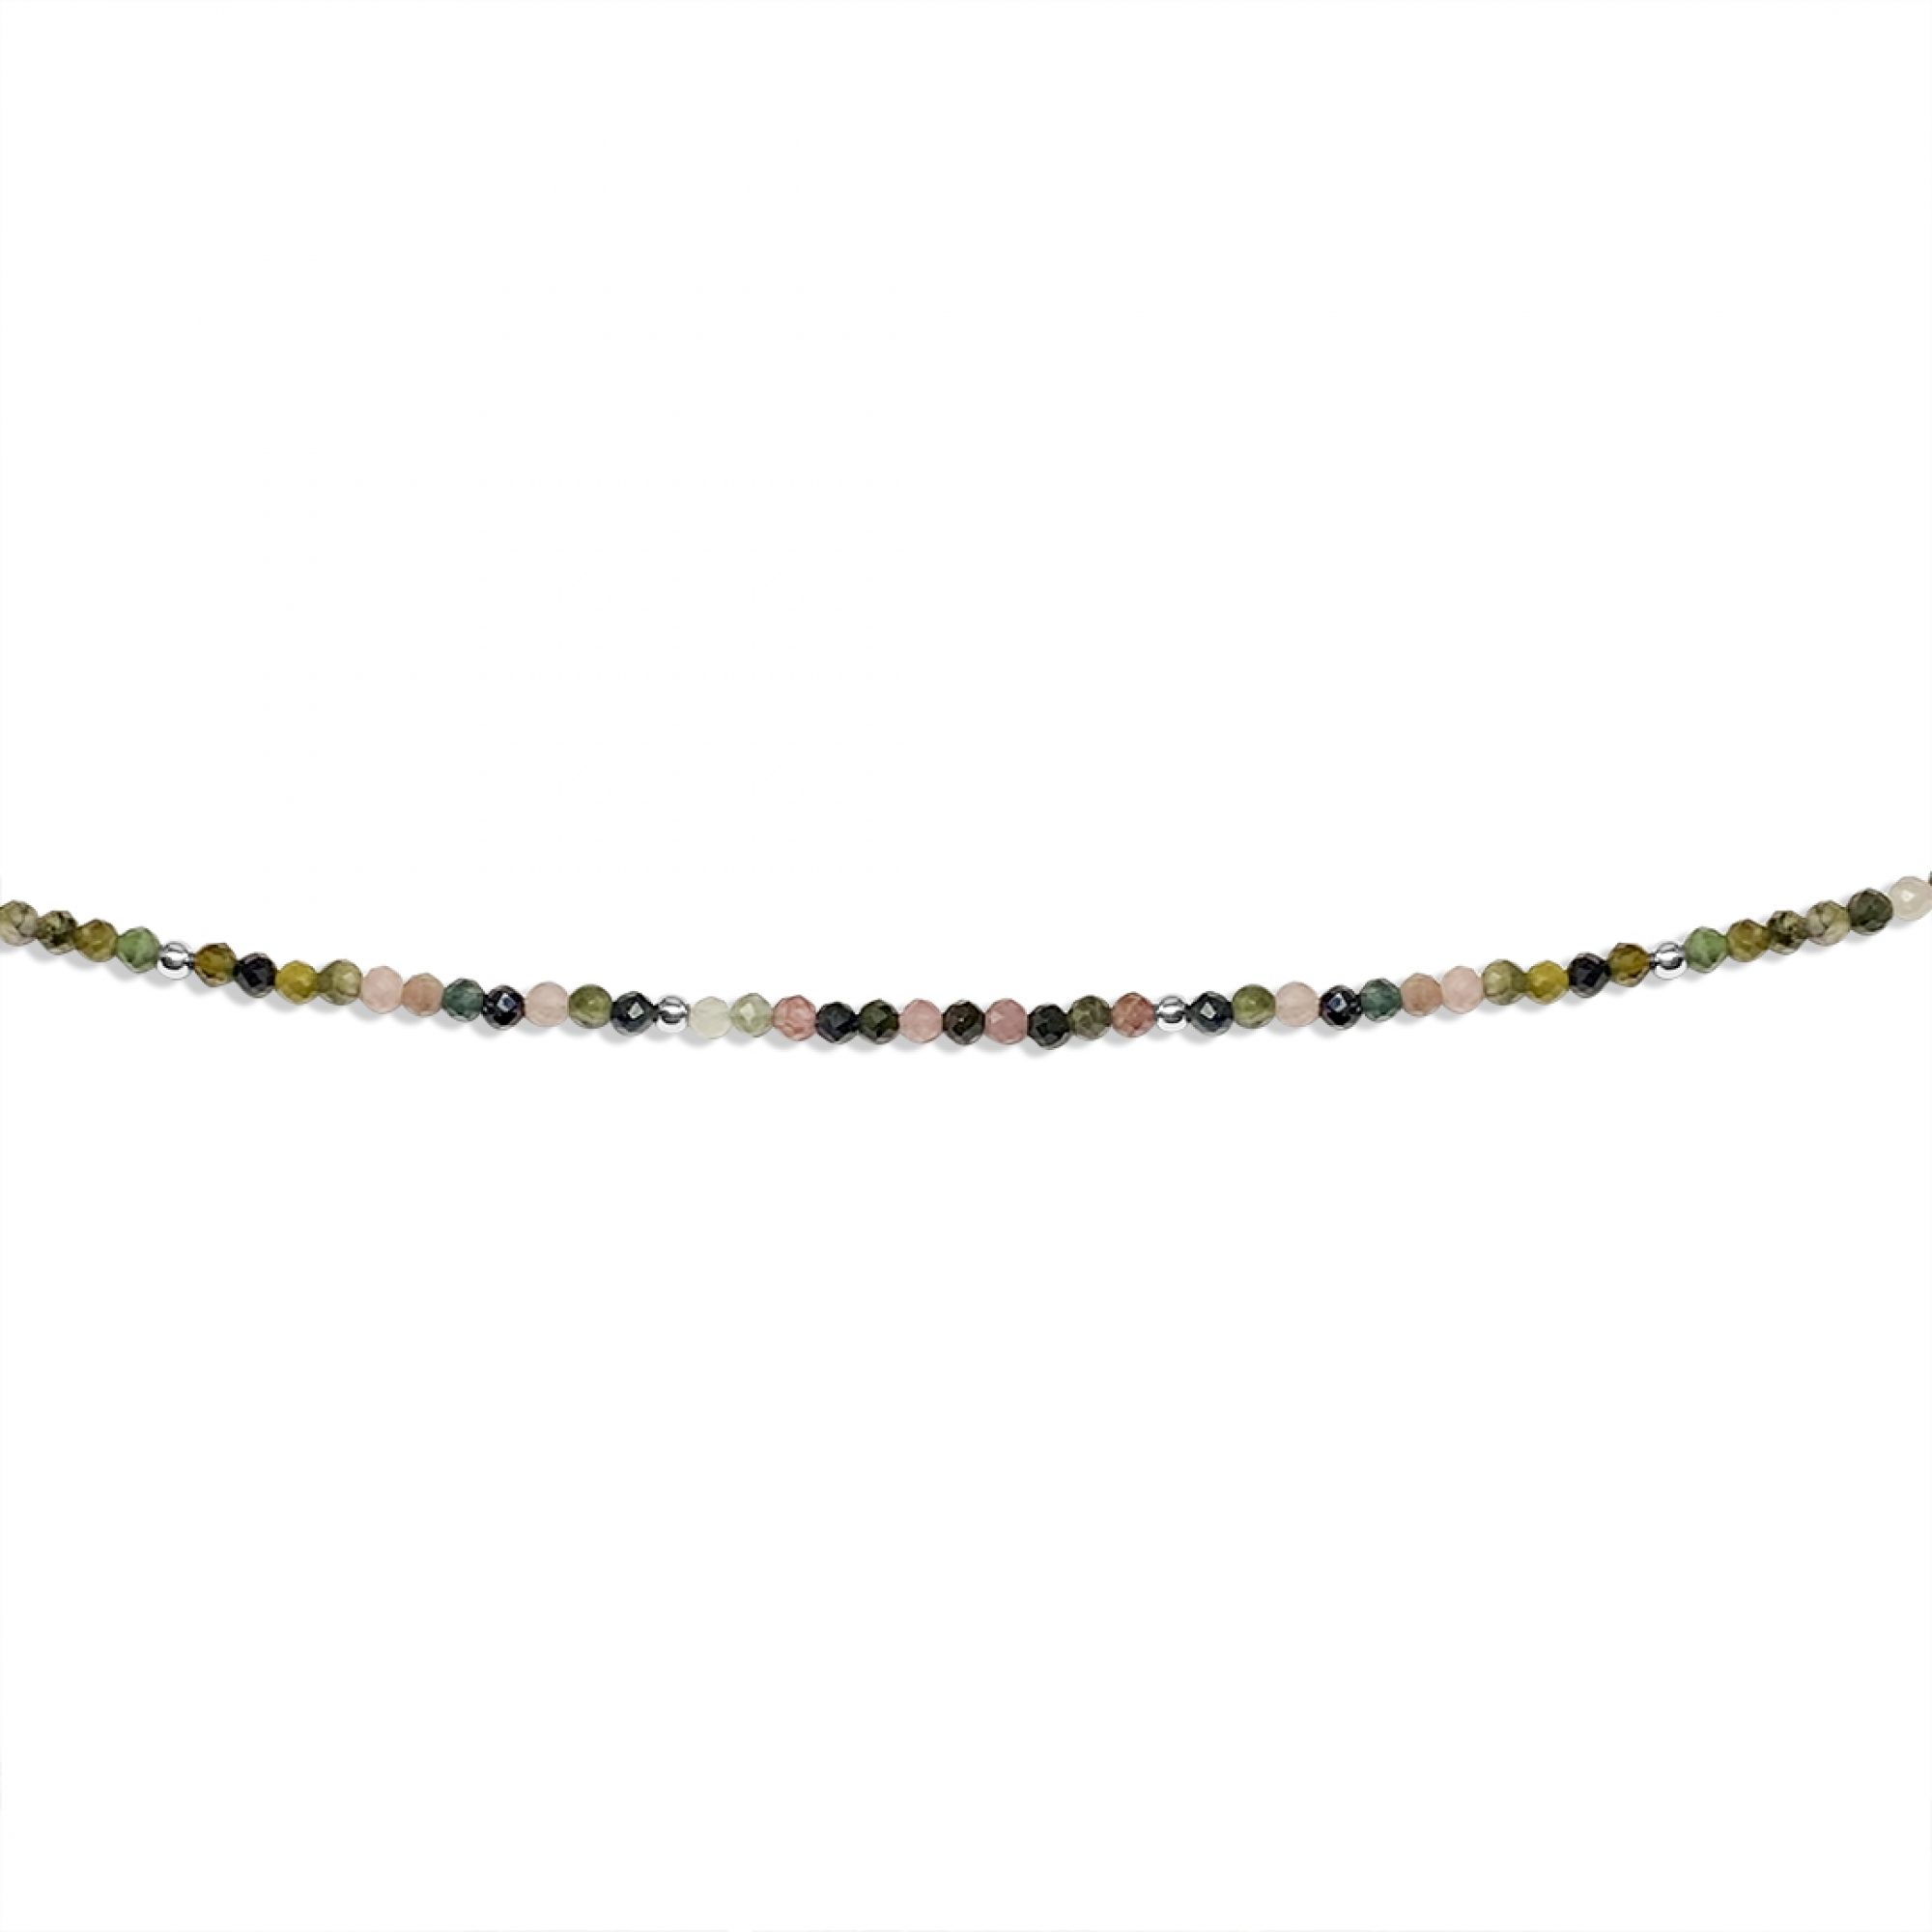 Anklet with tourmaline beads